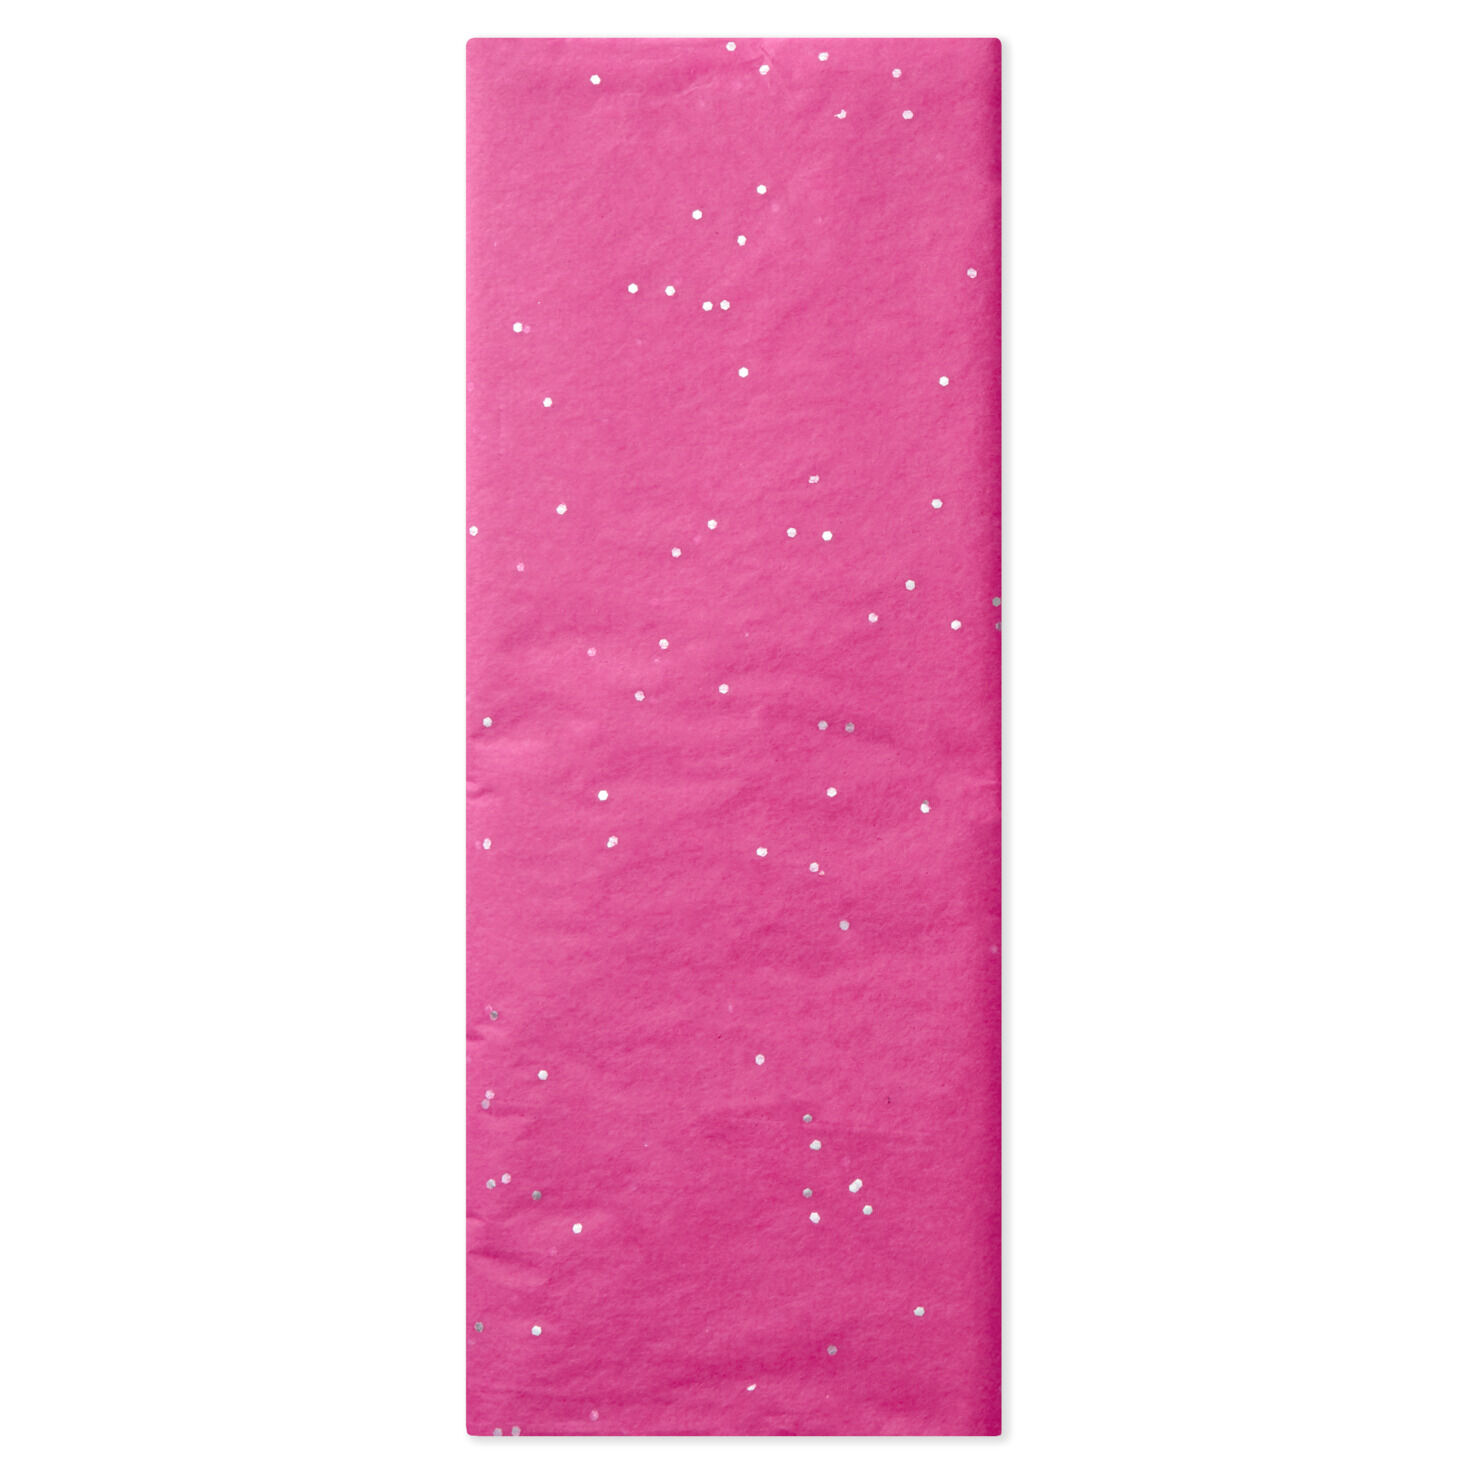 American Greetings Tissue Paper, Pink (6-Sheets)